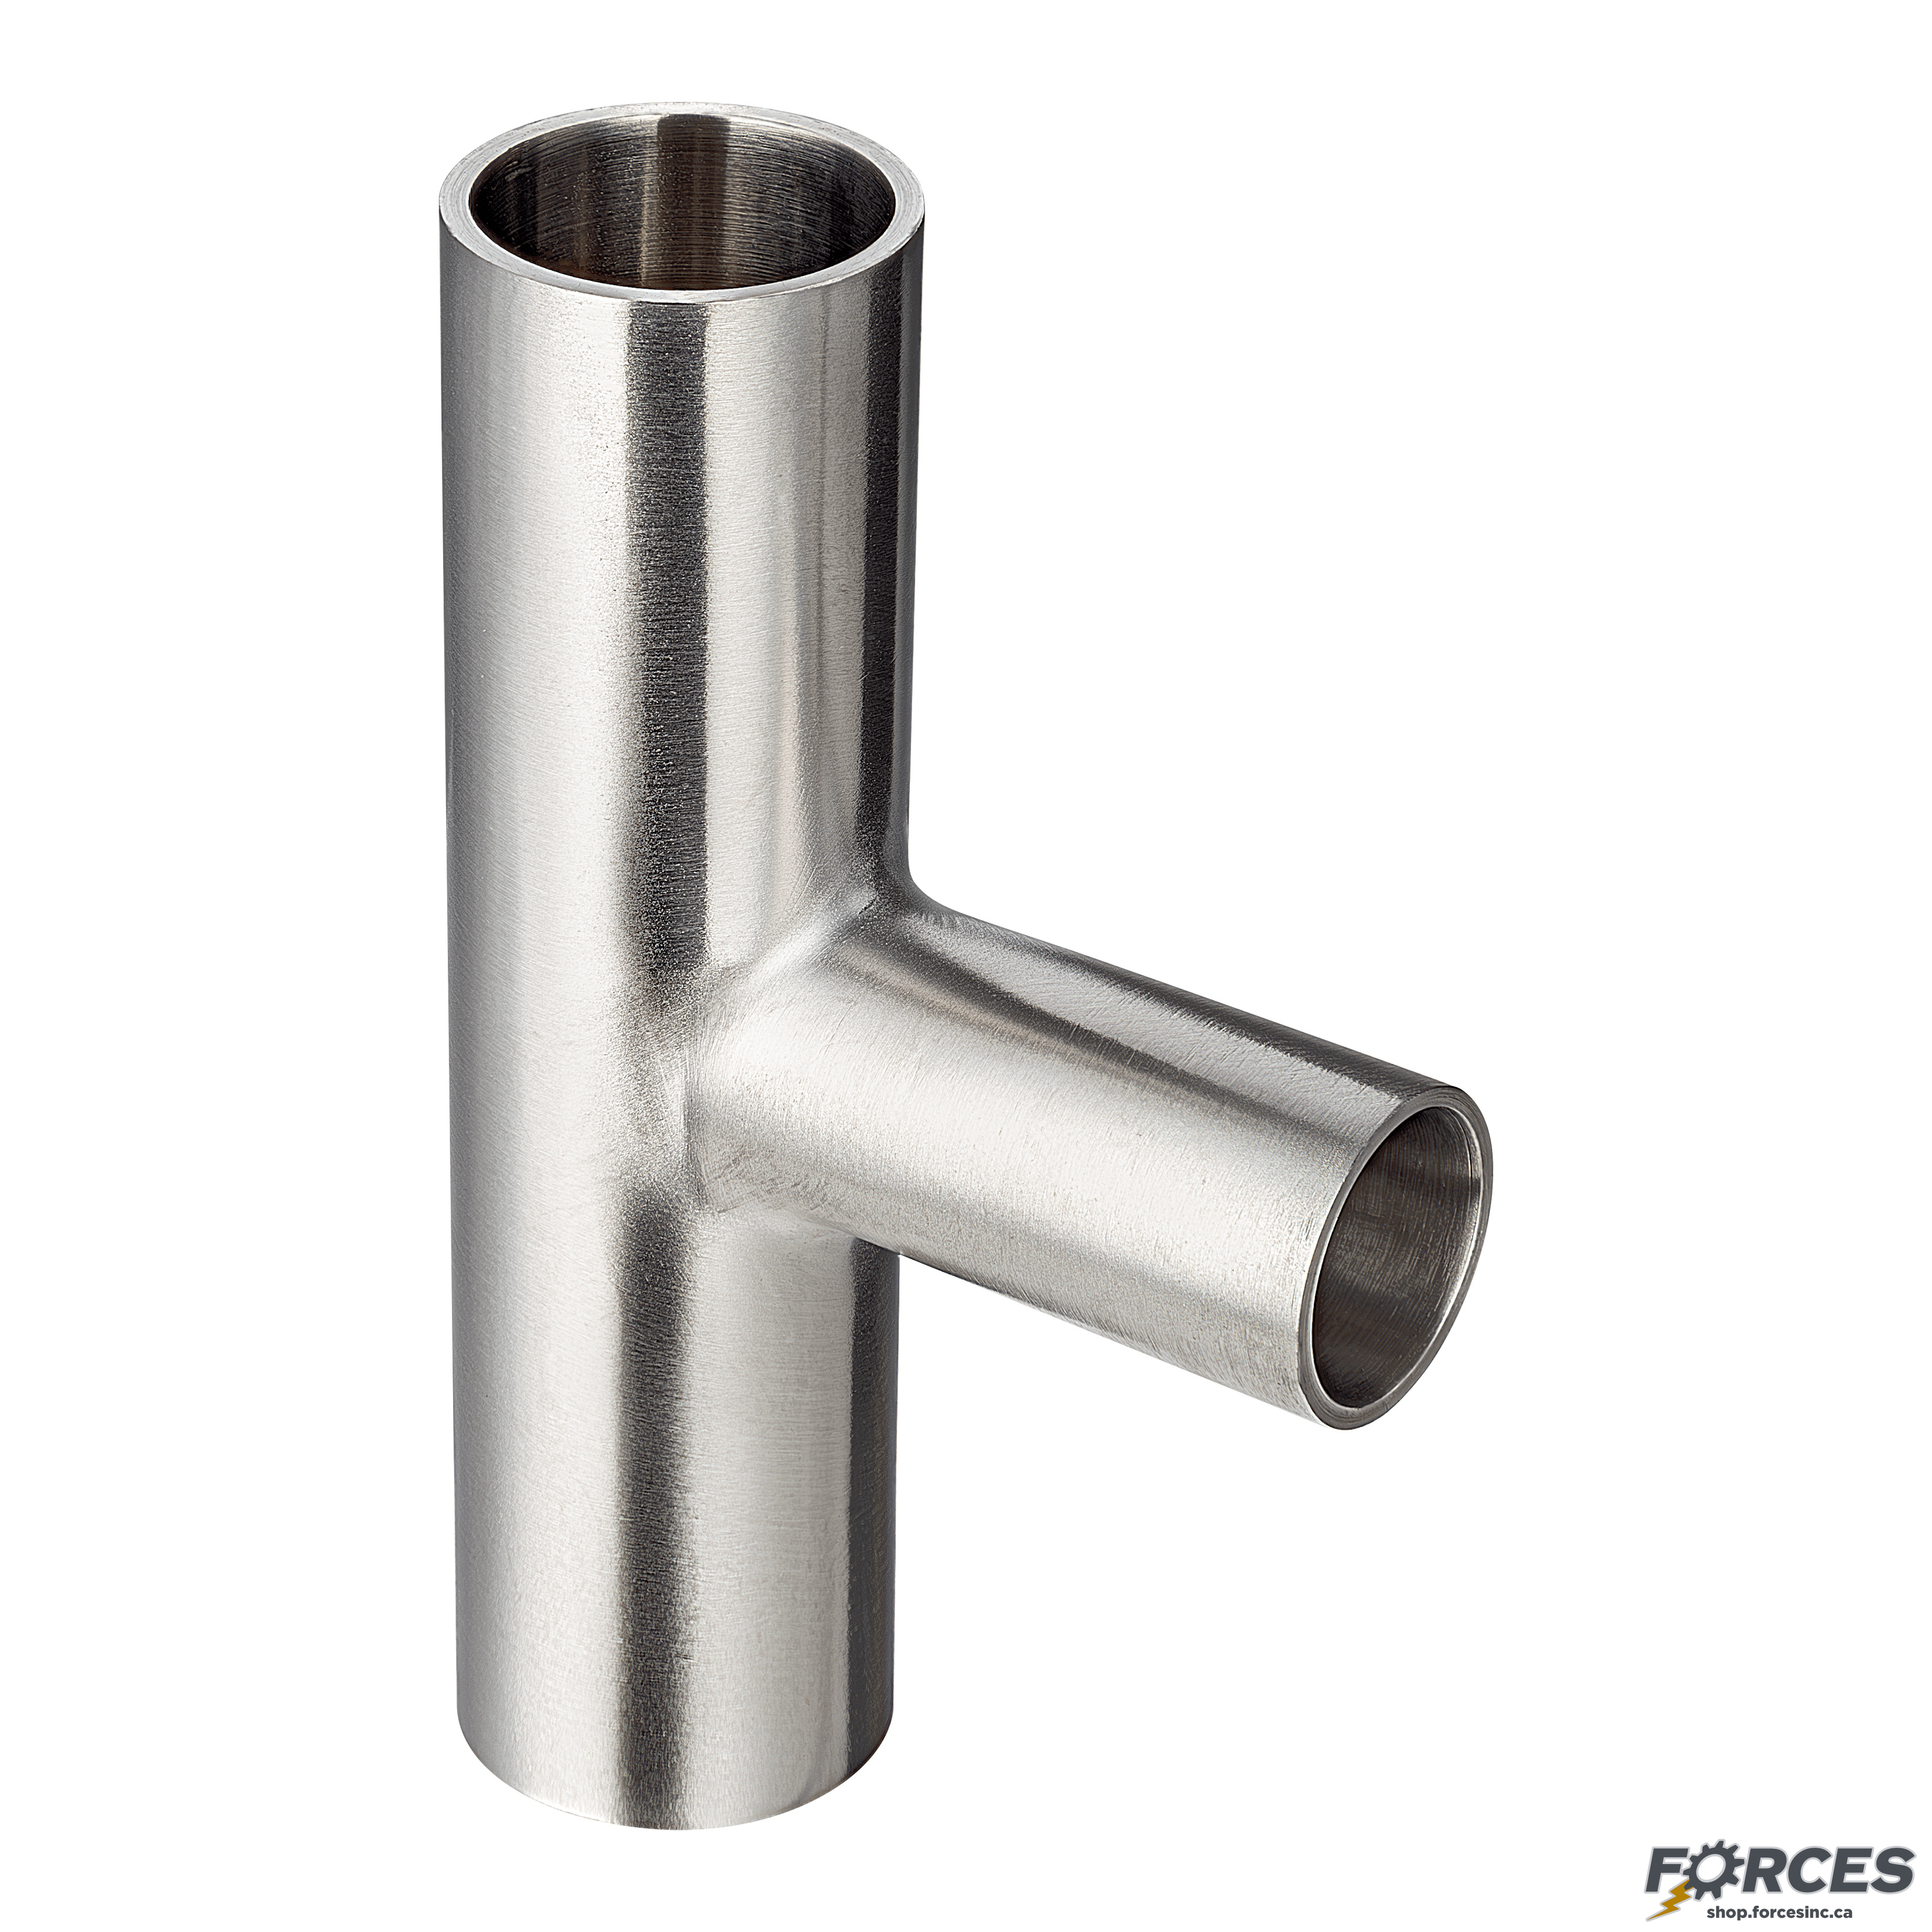 2" x 1-1/2" Butt Weld Tee Reducer - Stainless Steel 304 - Forces Inc